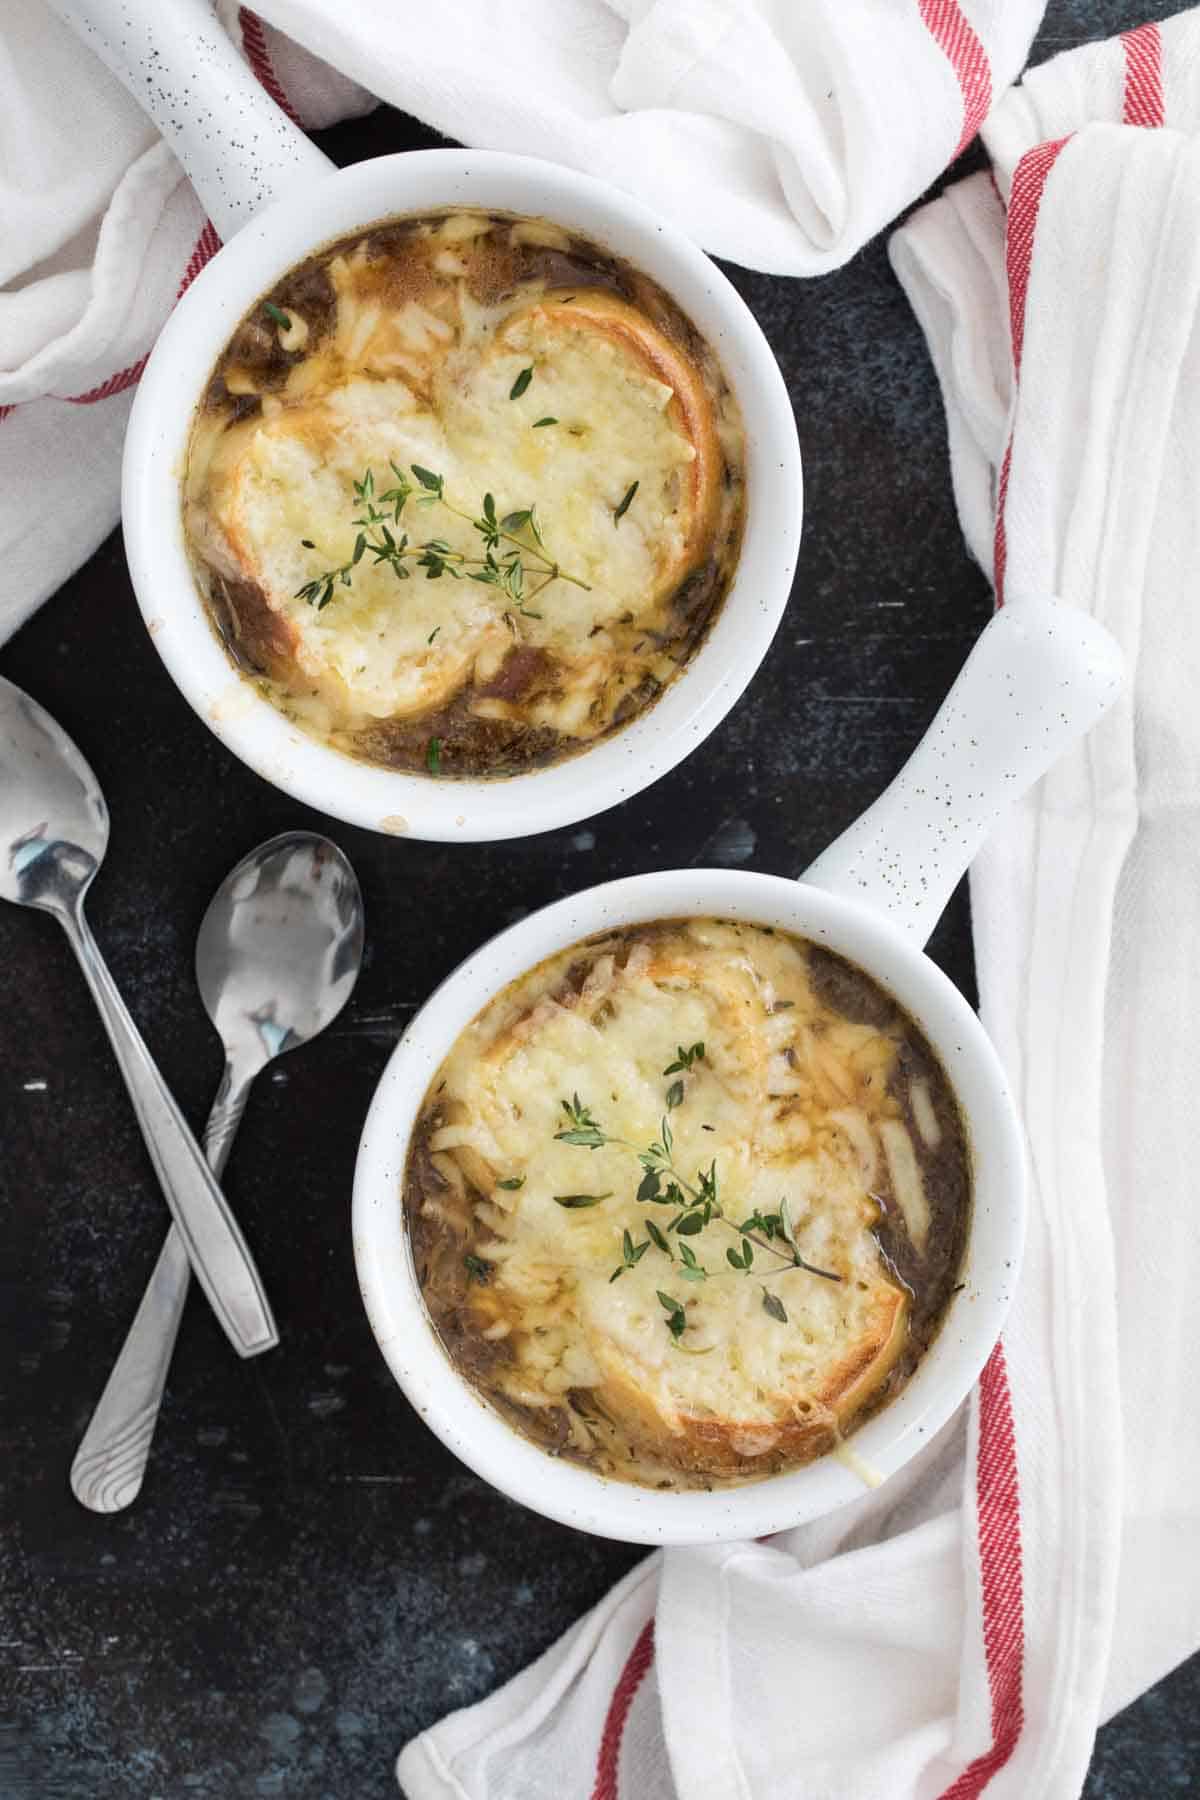 Overhead view of French onion soup in bowls